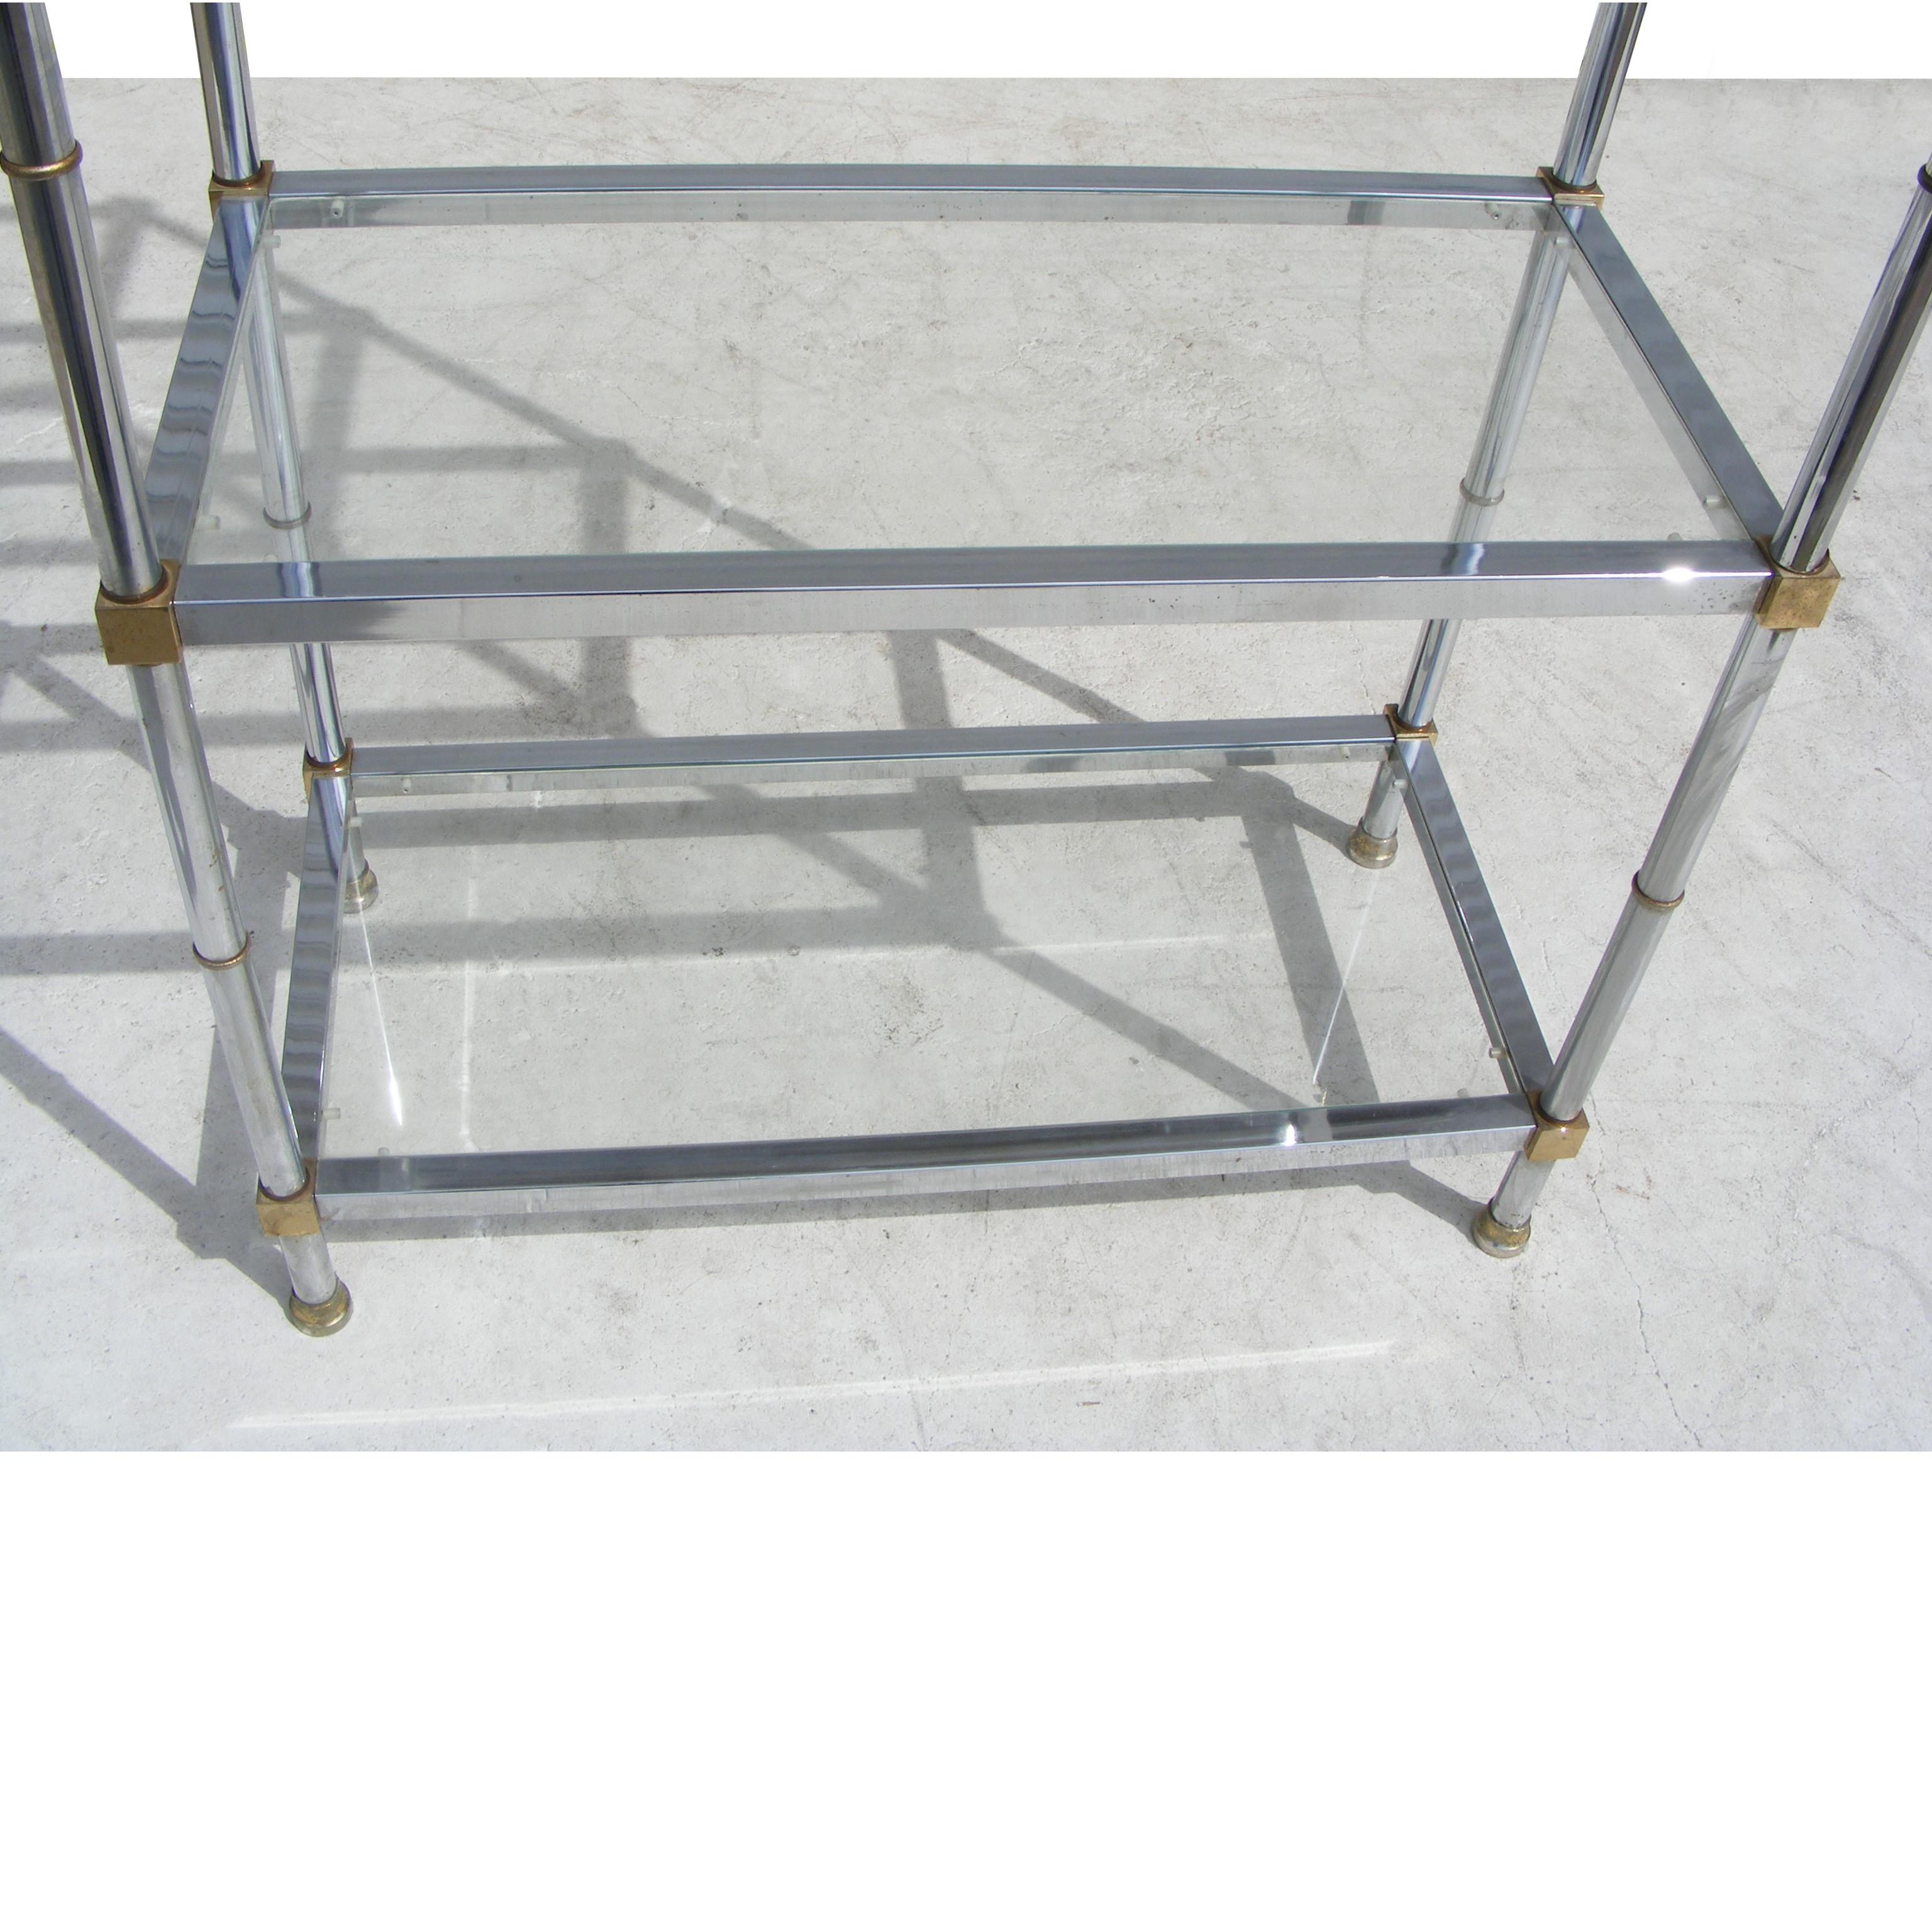 American Chrome And Glass Modernist Etagere Shelf Unit For Sale